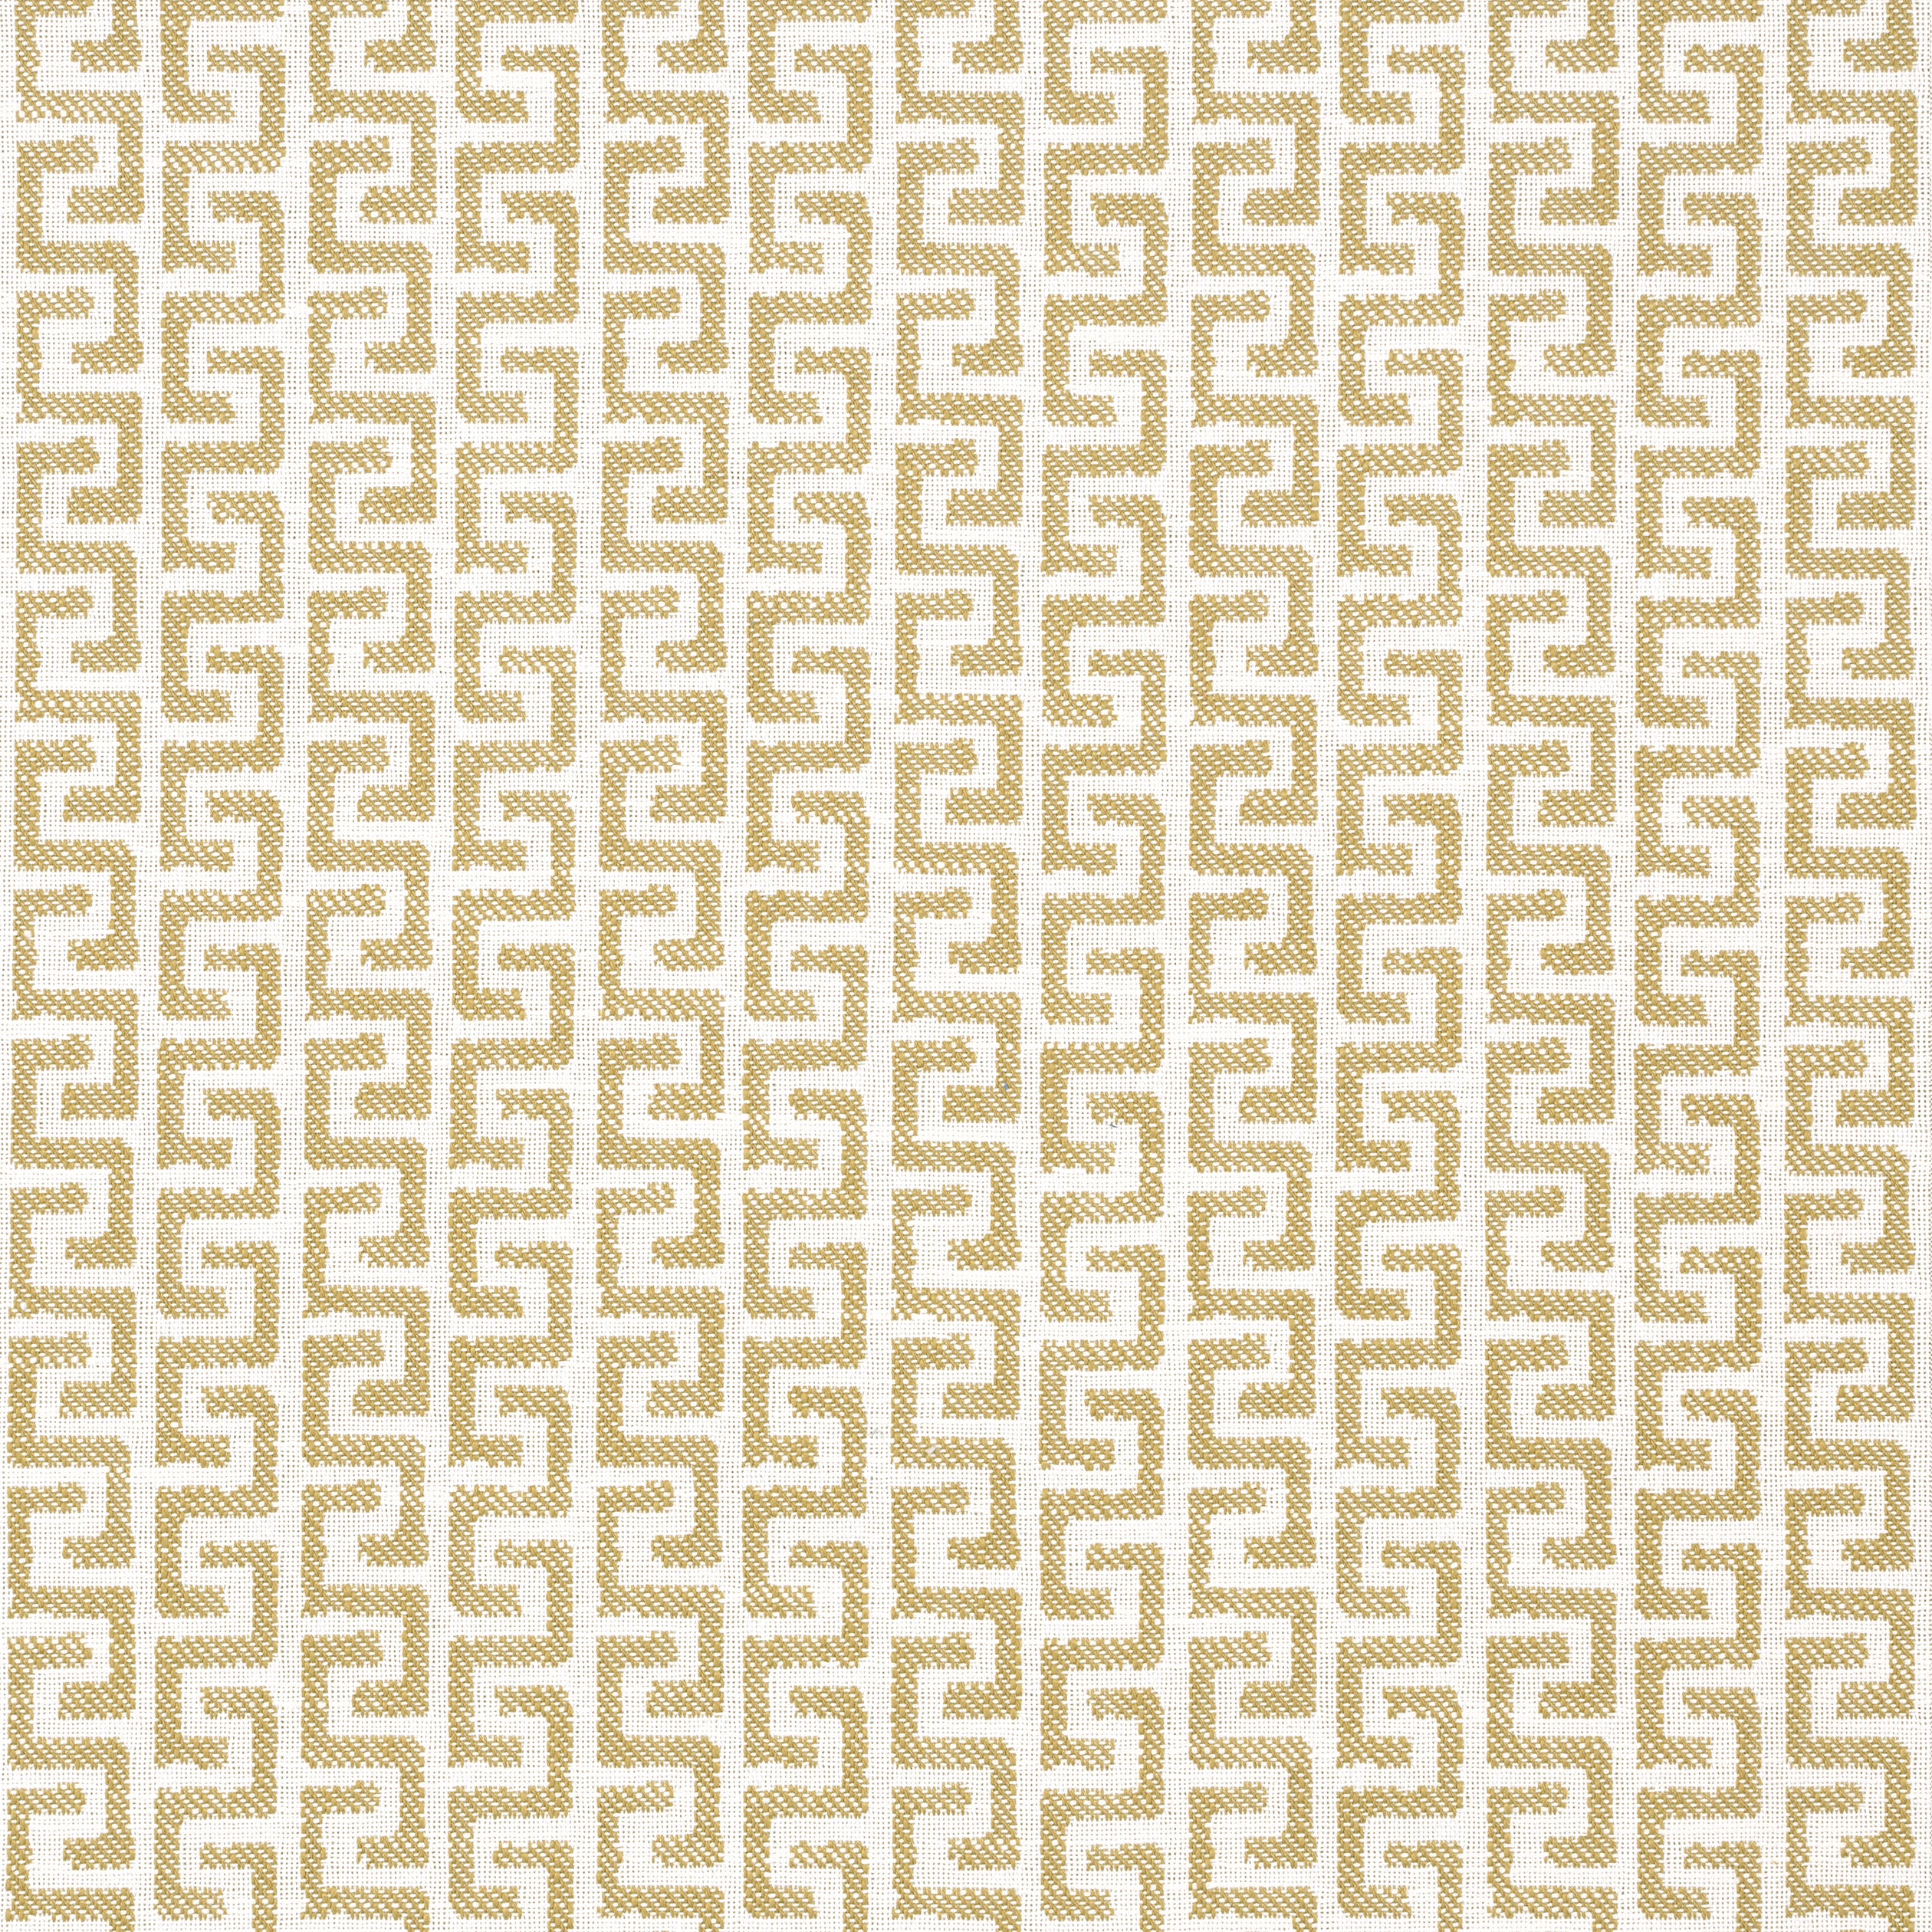 Merritt fabric in camel color - pattern number W74252 - by Thibaut in the Passage collection